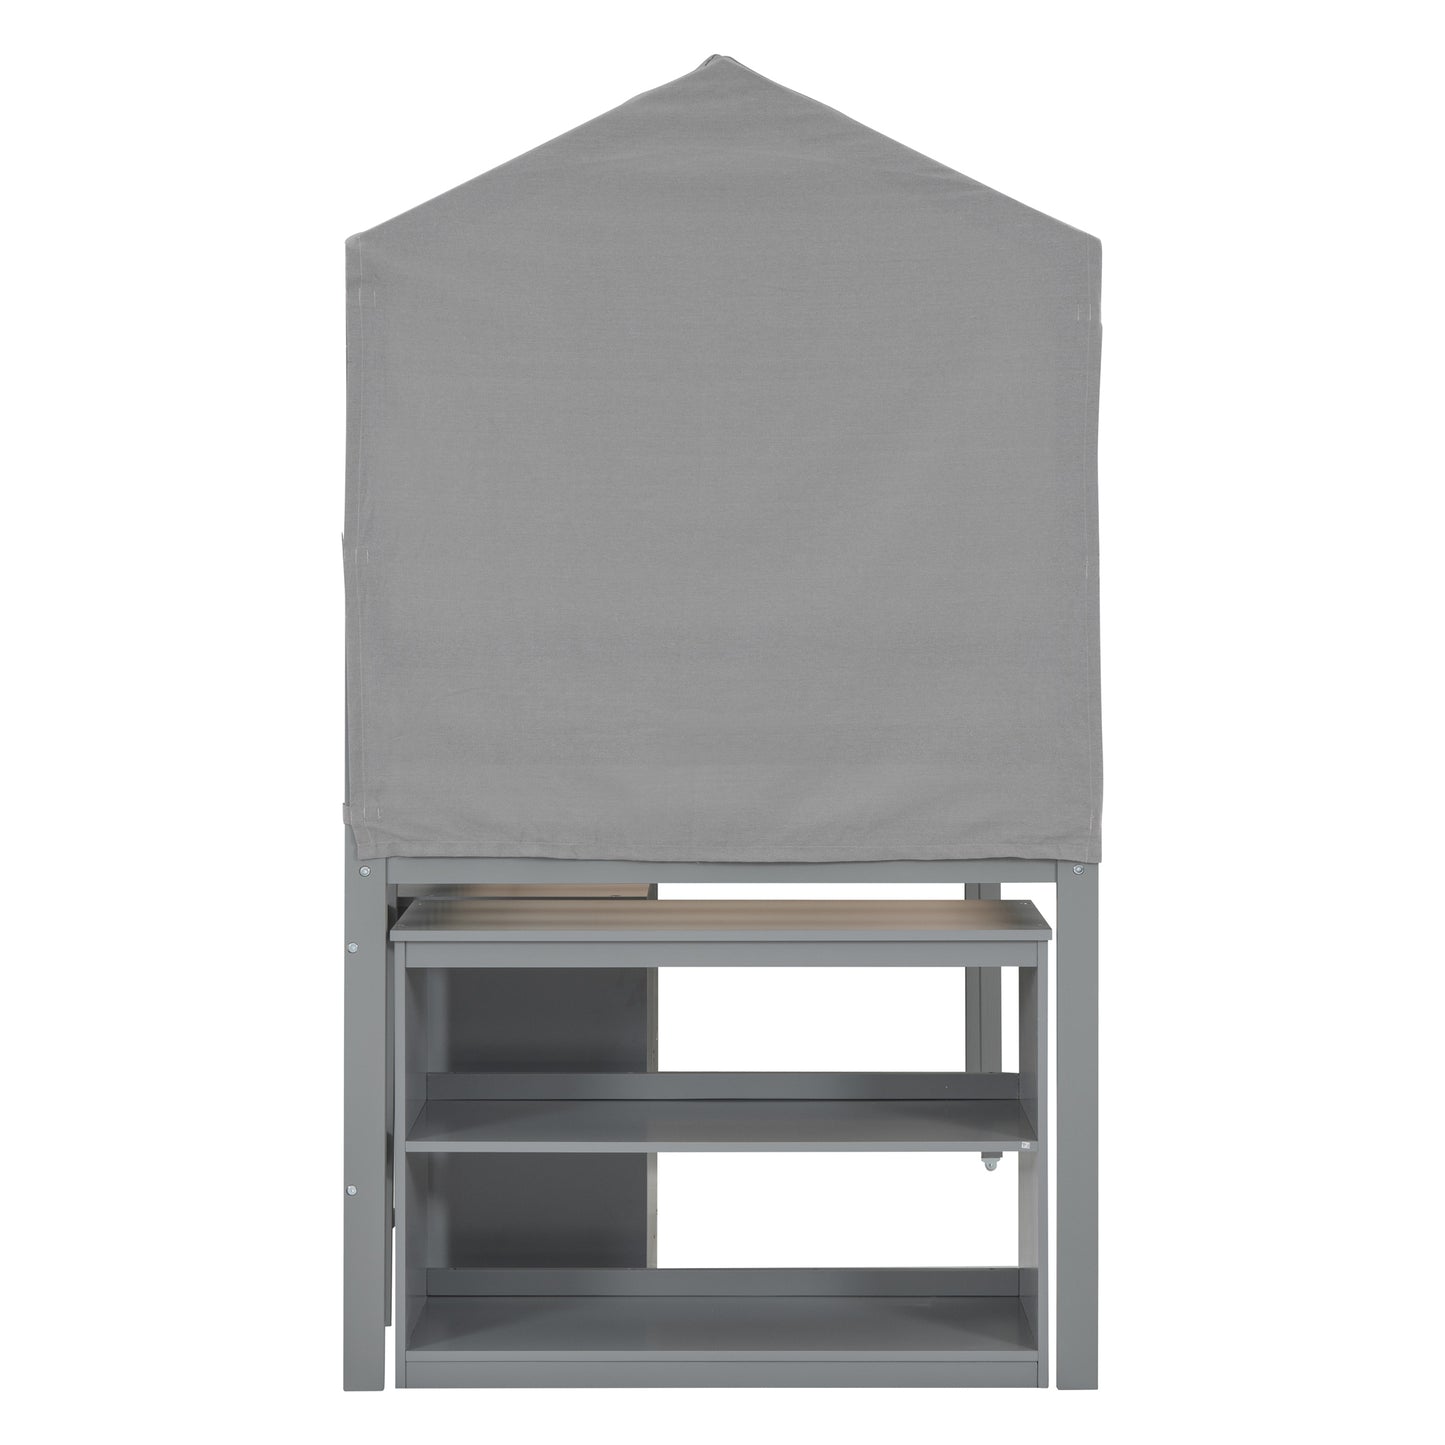 Twin Size Loft Bed with Rolling Cabinet, Shelf and Tent - Gray